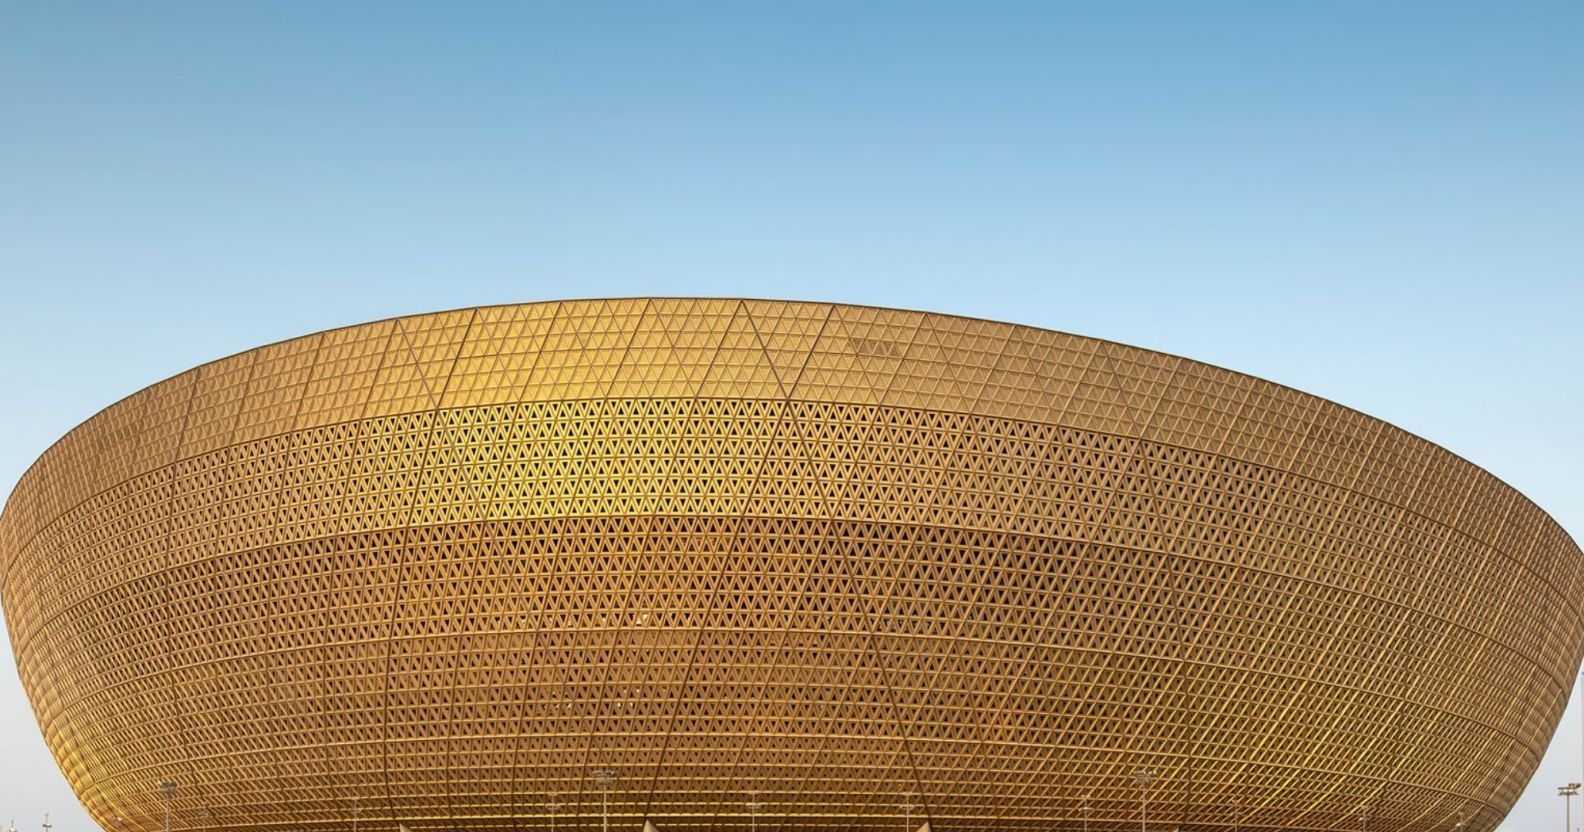 A picture of the golden-brown outer rim of the Lusail stadium in Doha, Qatar